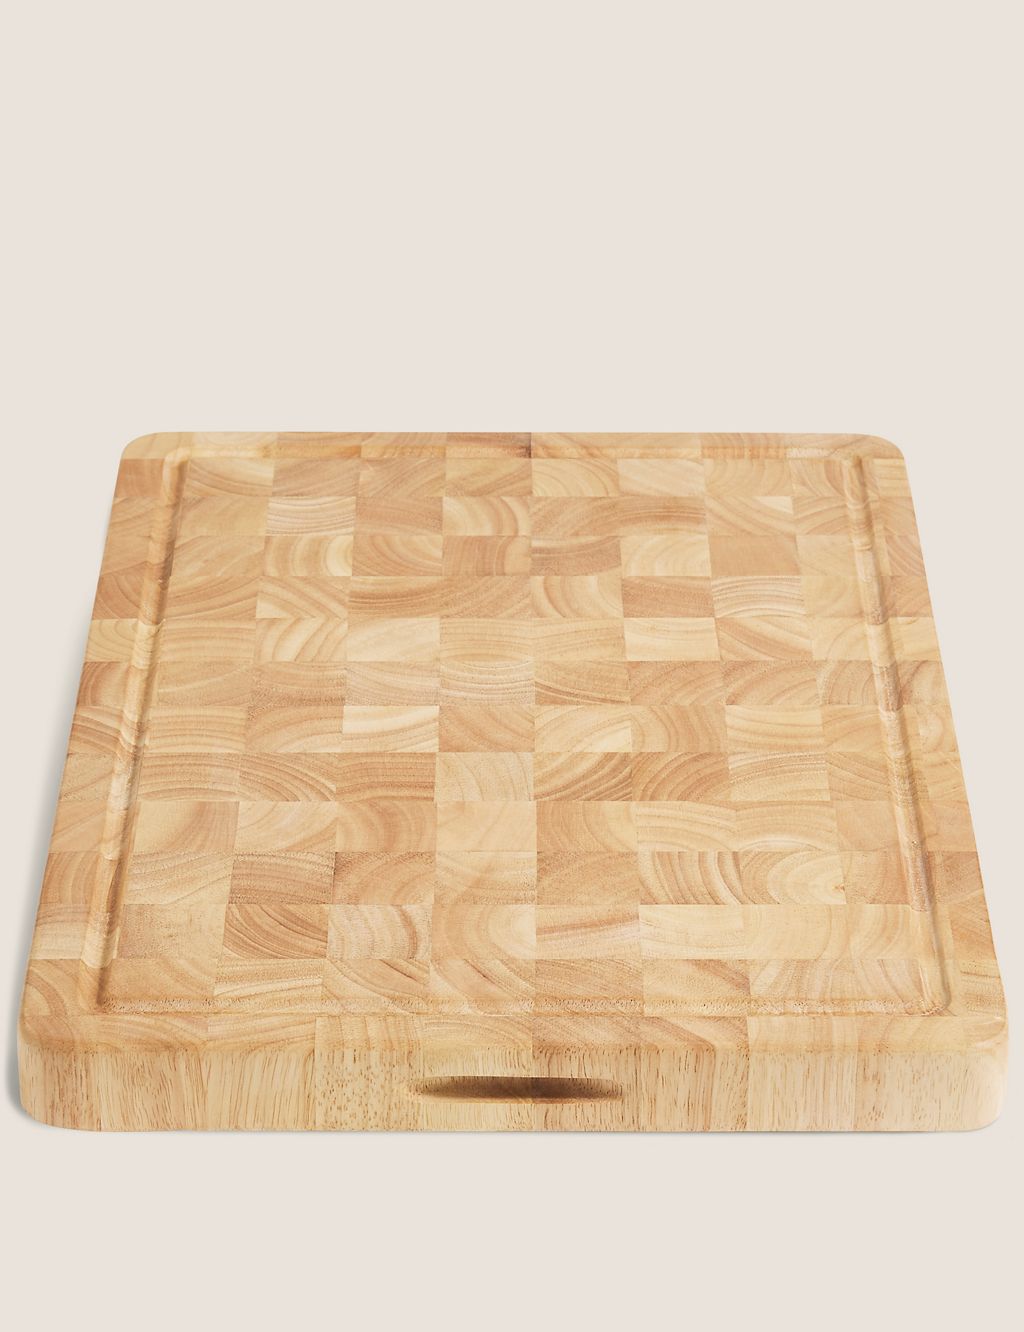 Large Butcher's Block 1 of 4